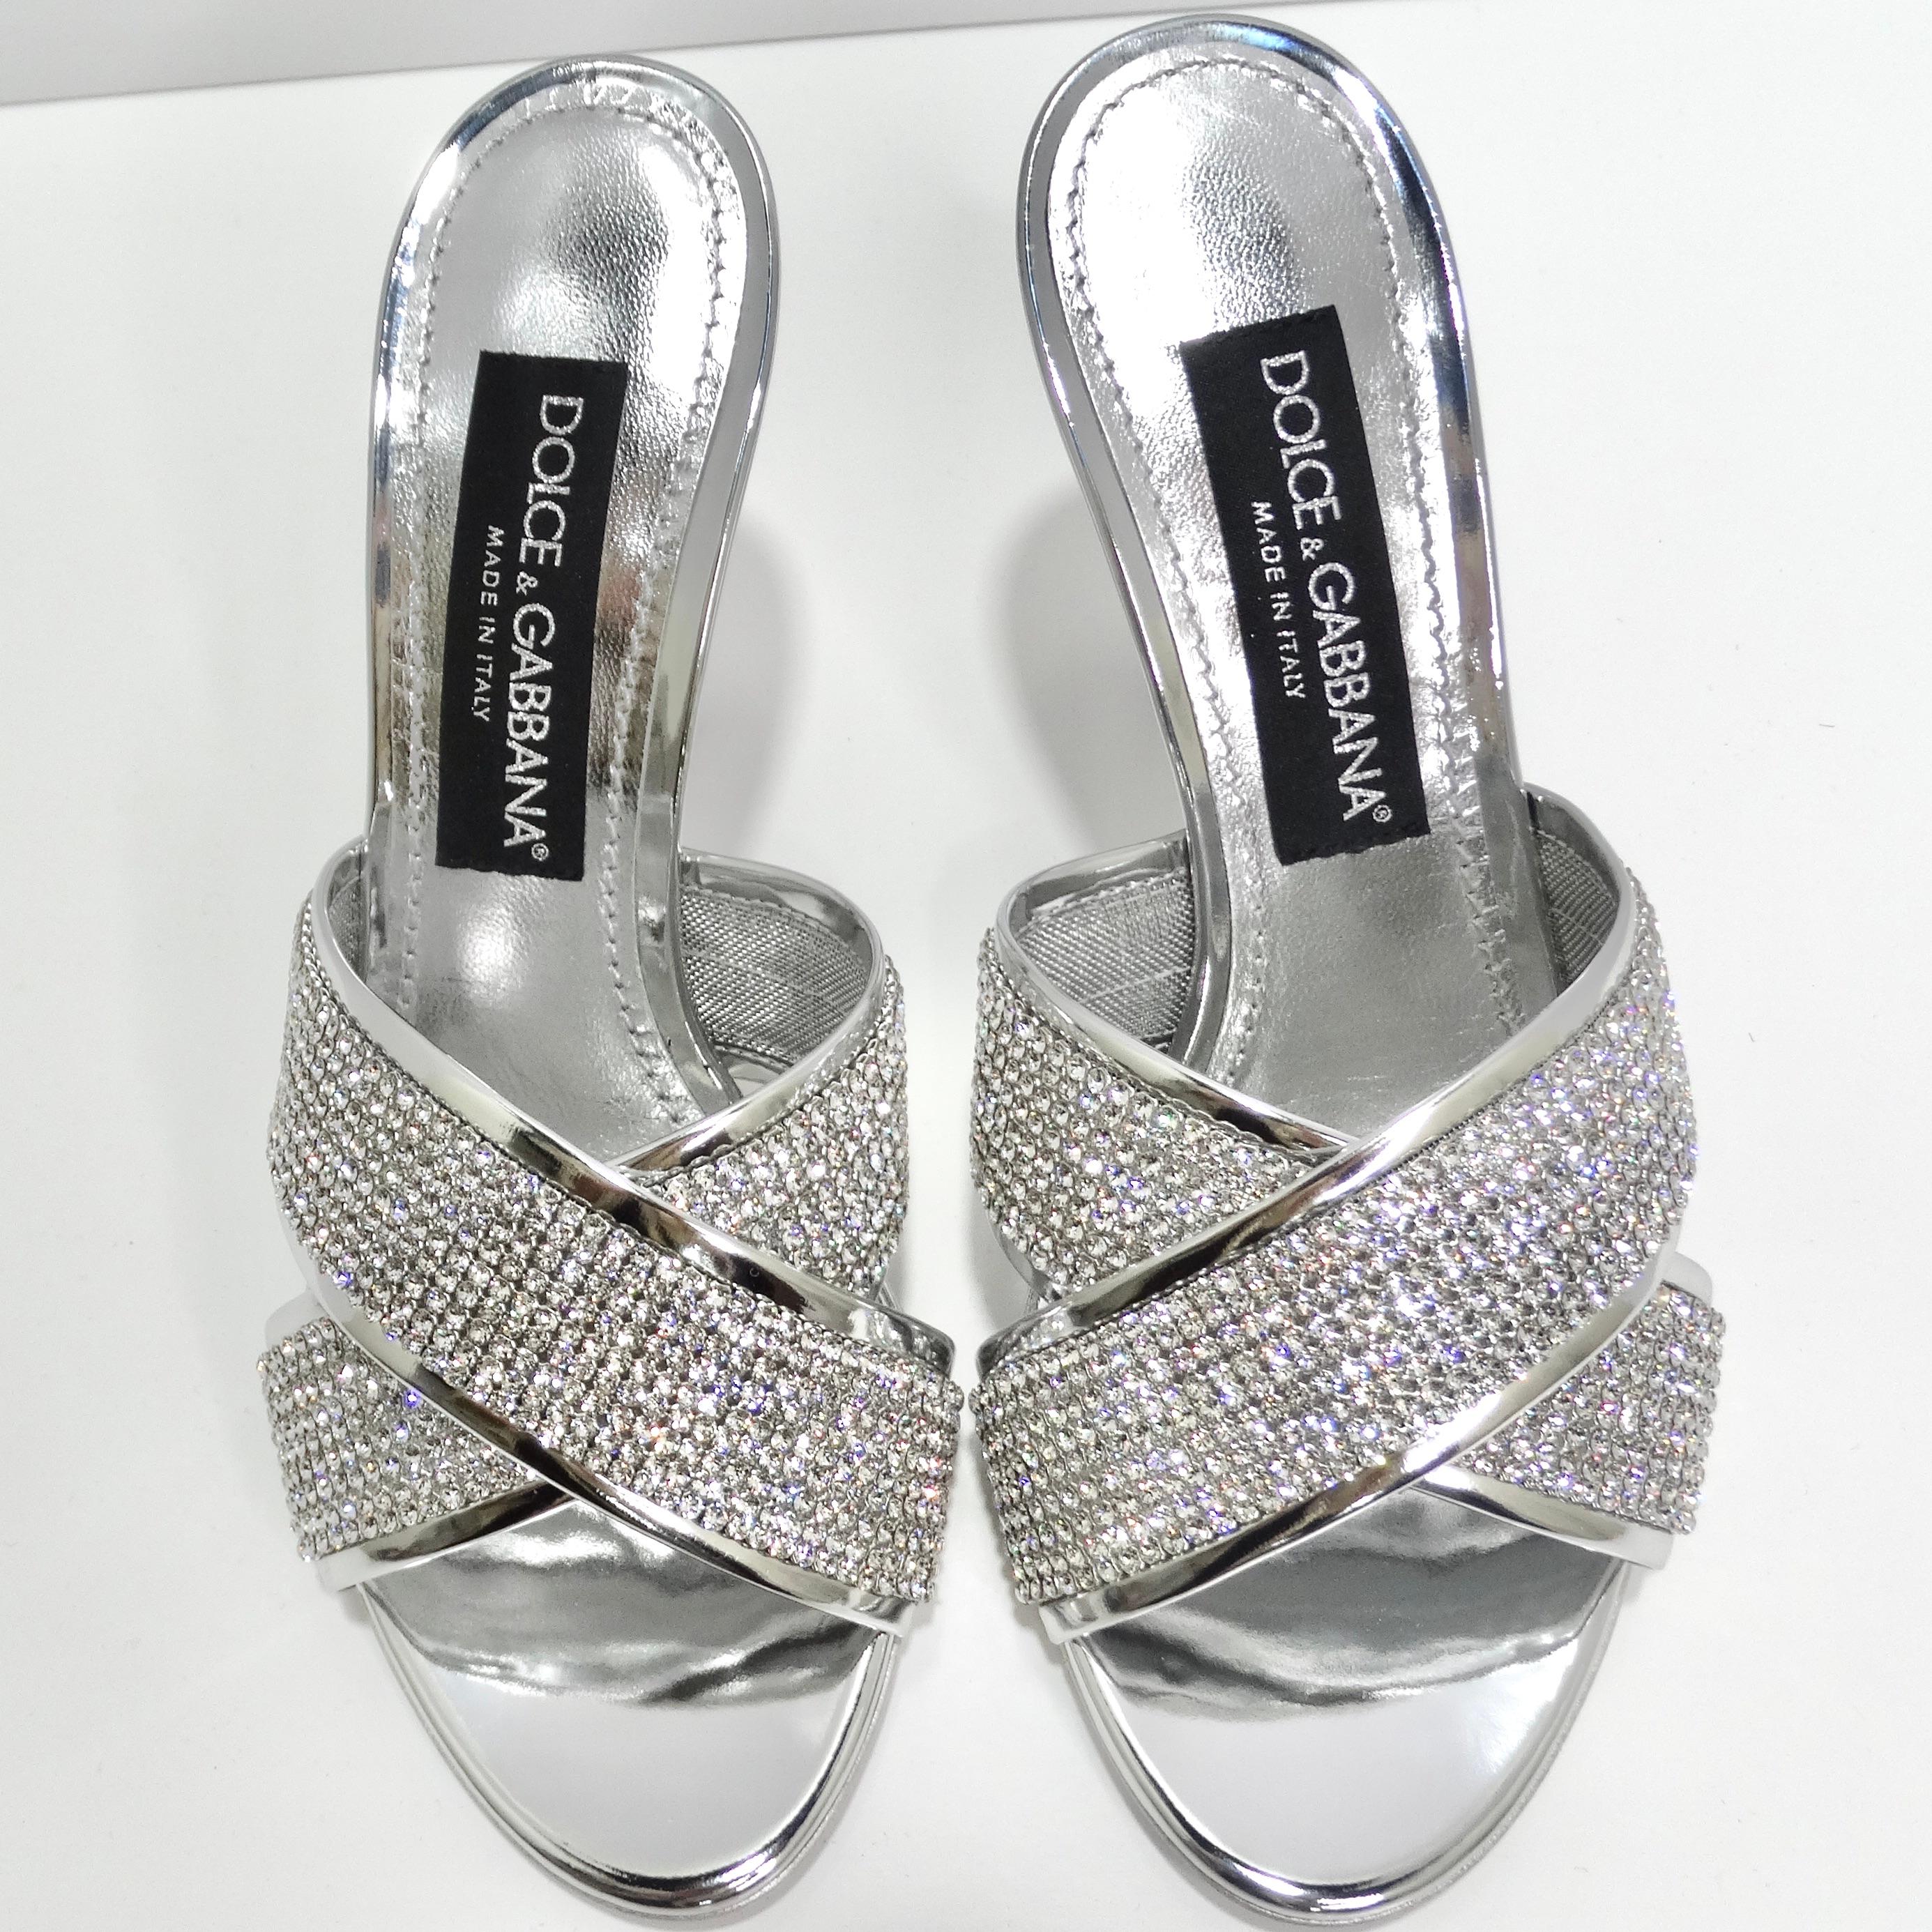 Step into the spotlight with the Dolce & Gabbana Keira Crystal-Embellished Mules – a pair of metallic silver leather heels that redefine glamour. The mule-style design brings a touch of sophistication, while the crystal-embellished mesh straps add a